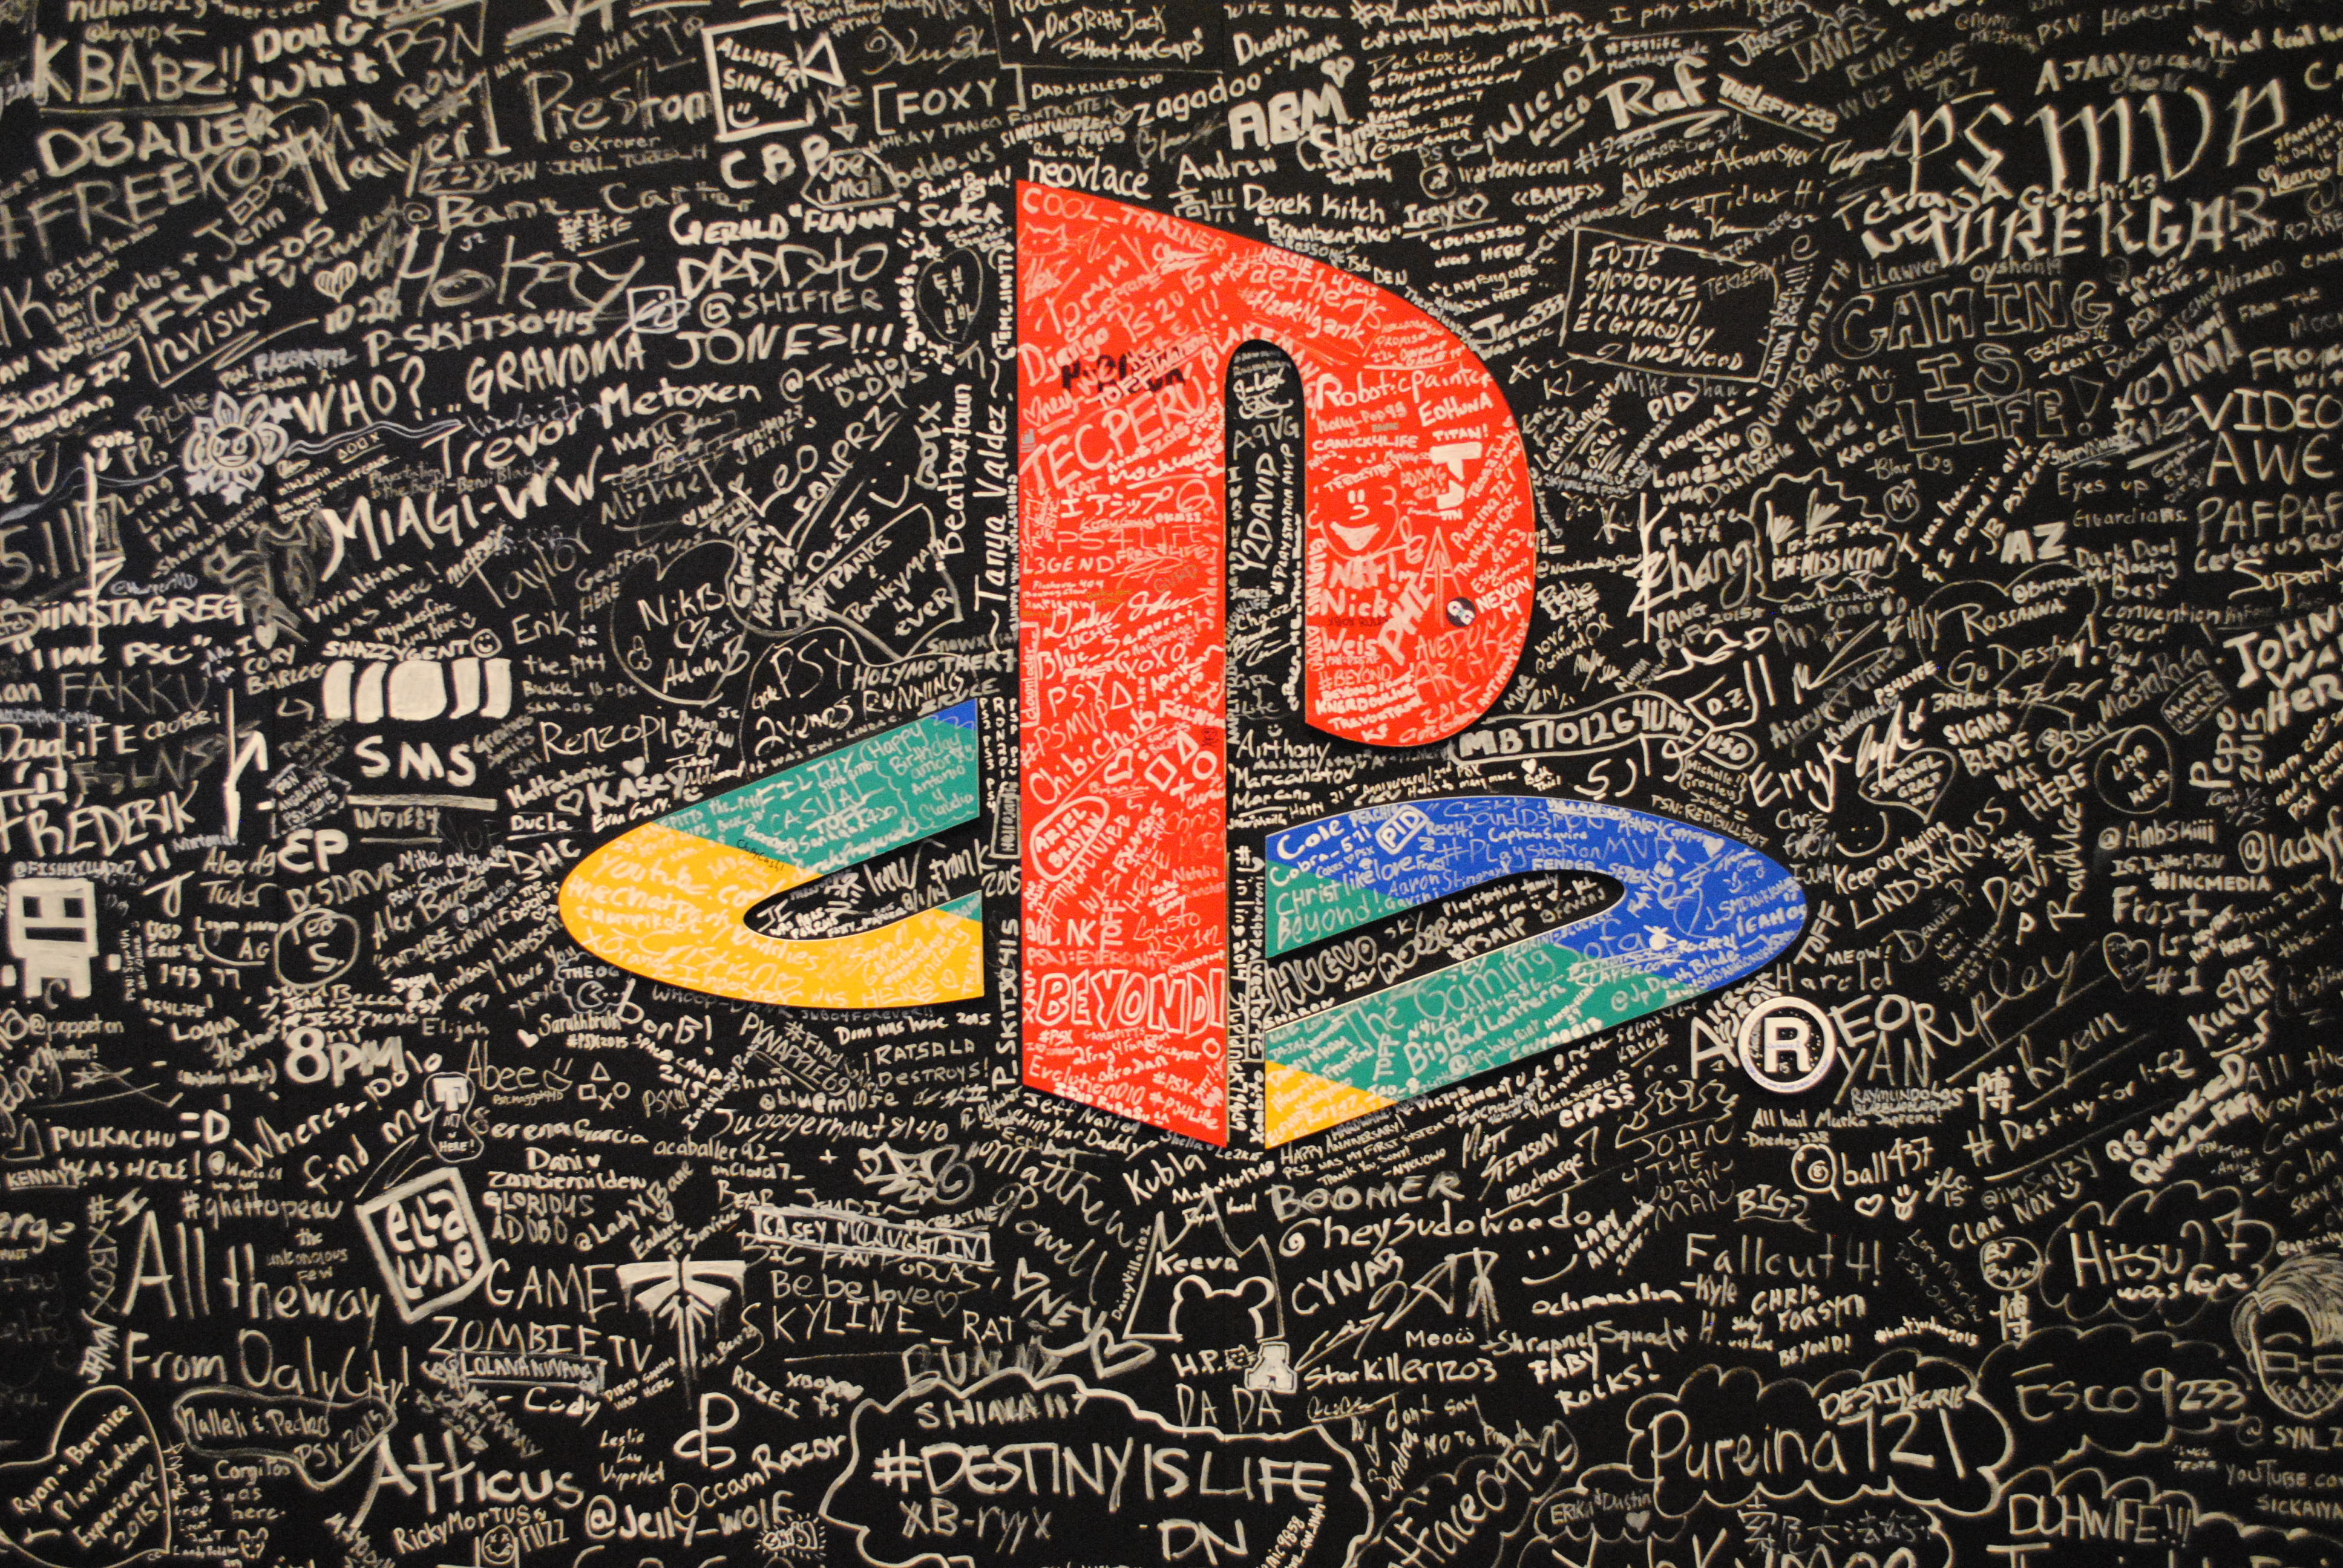 PlayStation Experience 2015